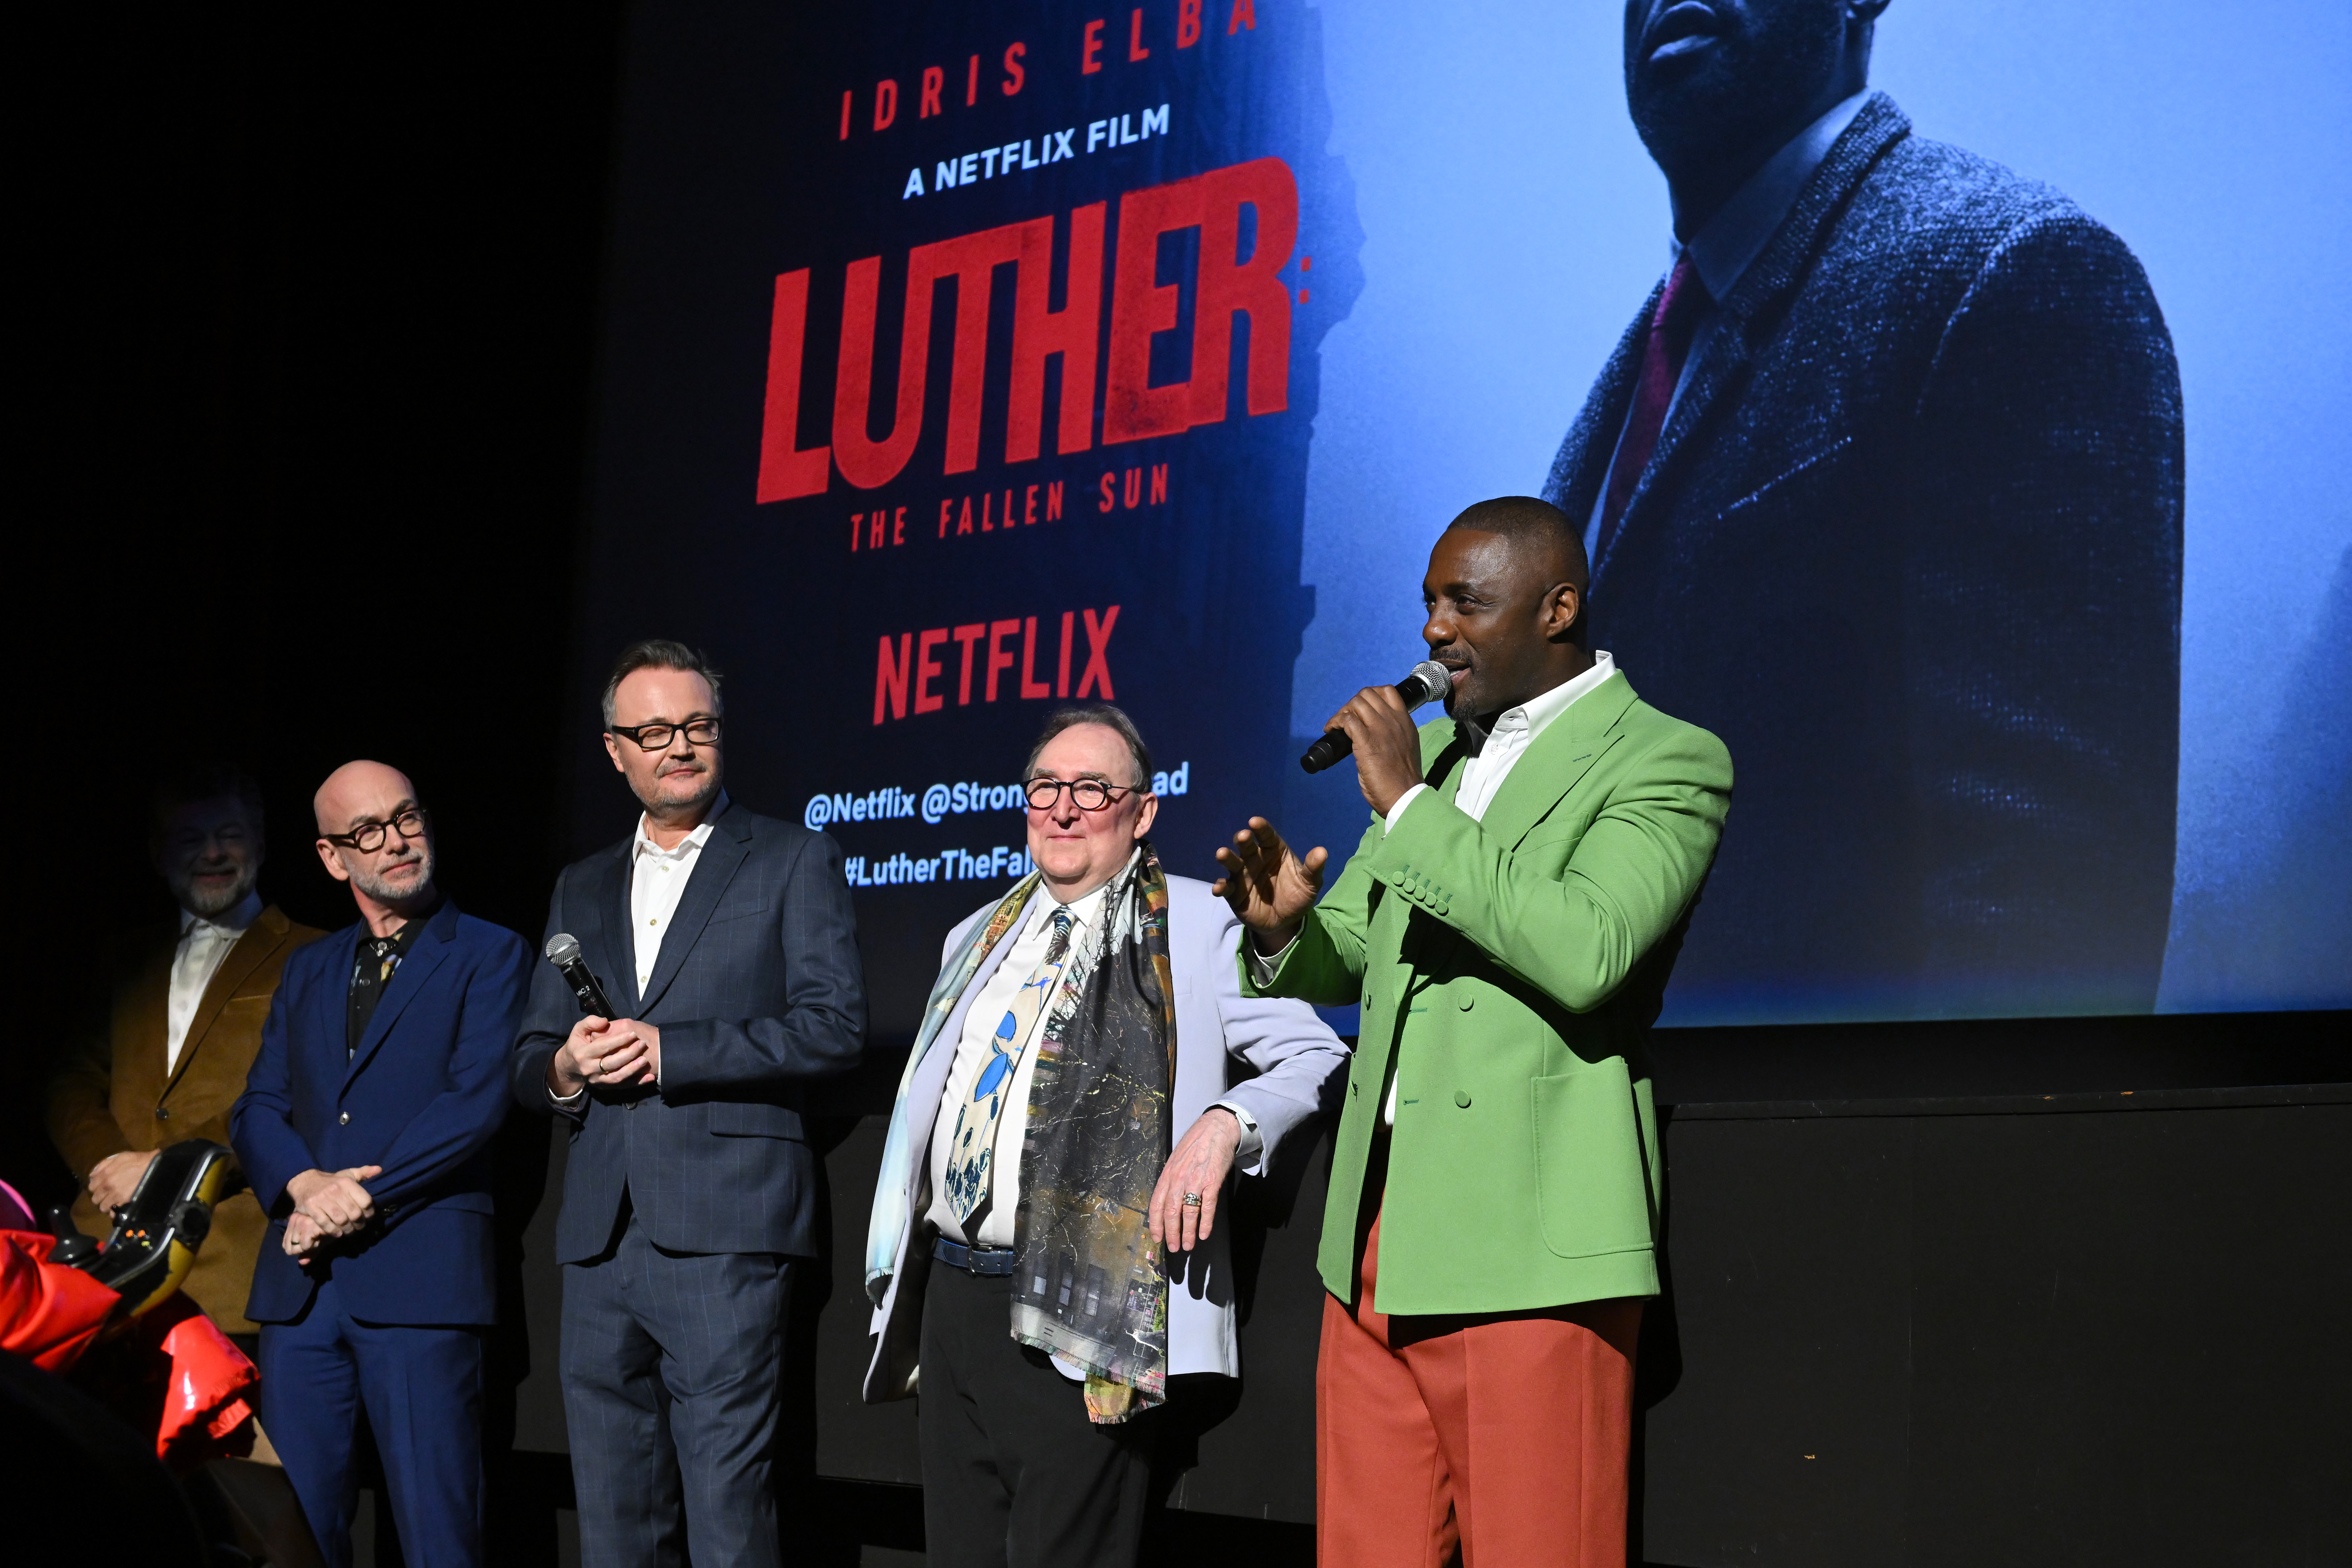 Luther: The Fallen Sun NY premiere